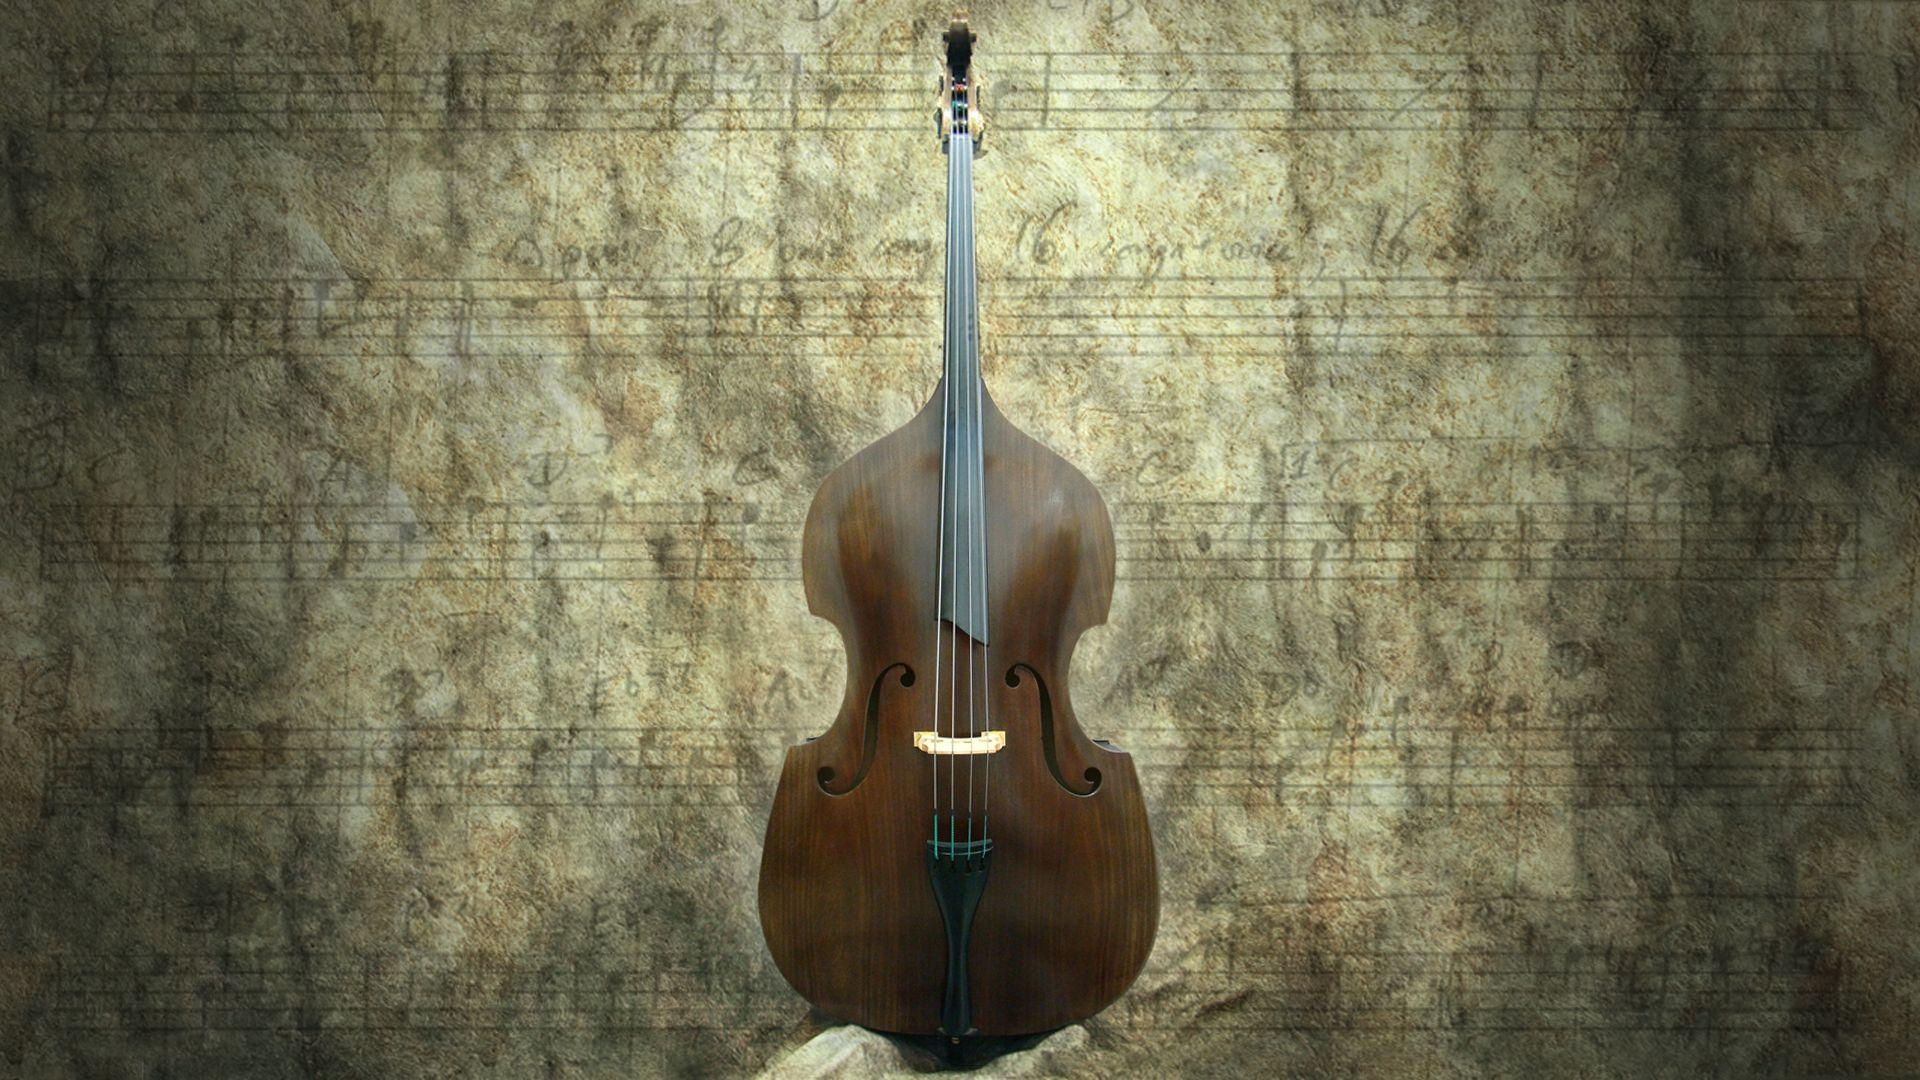 Double Bass Wallpaper, High Definition, High Quality